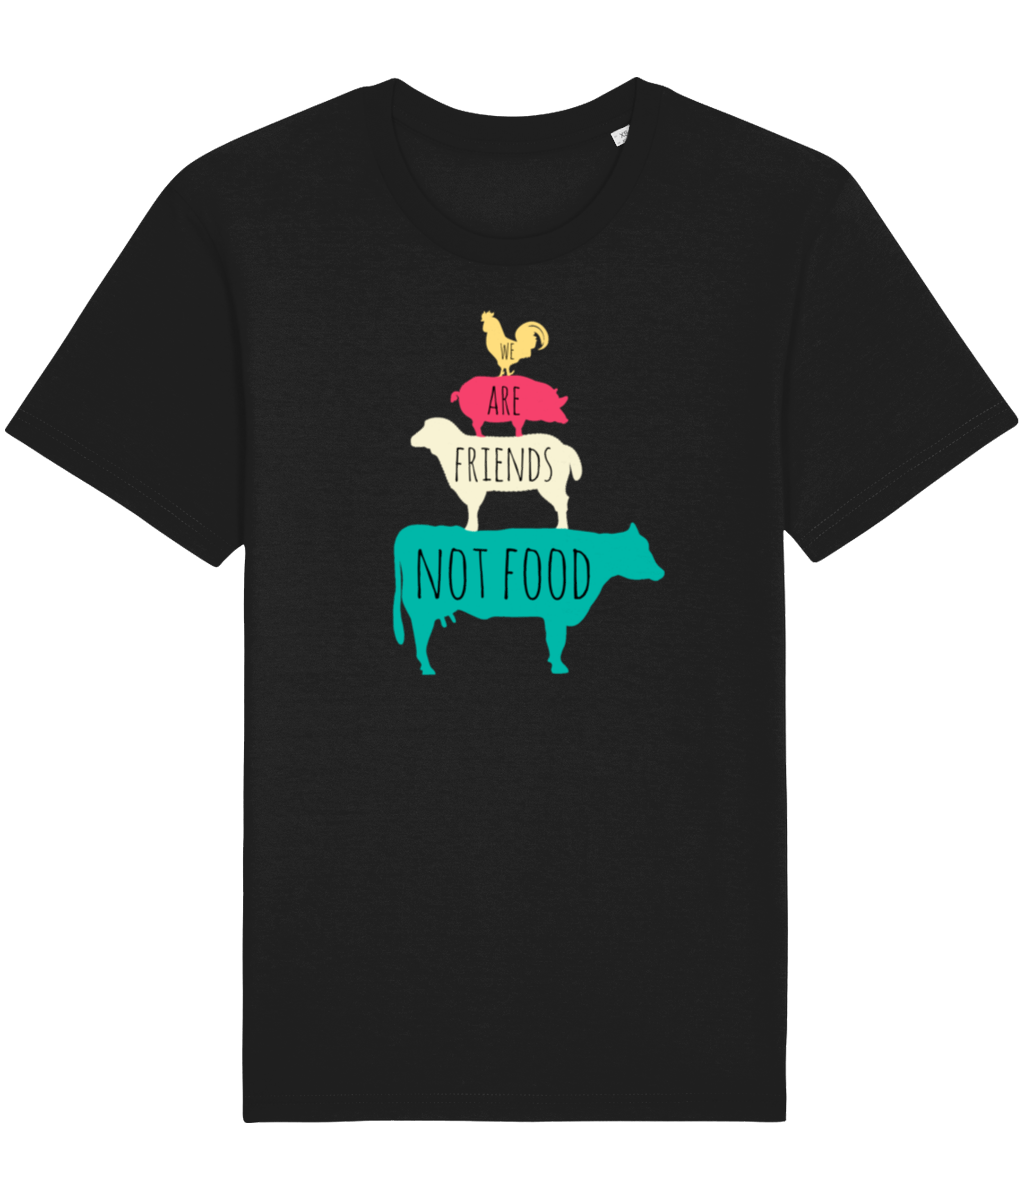 Black vegan shirt with farm animals and the words we are friends not food